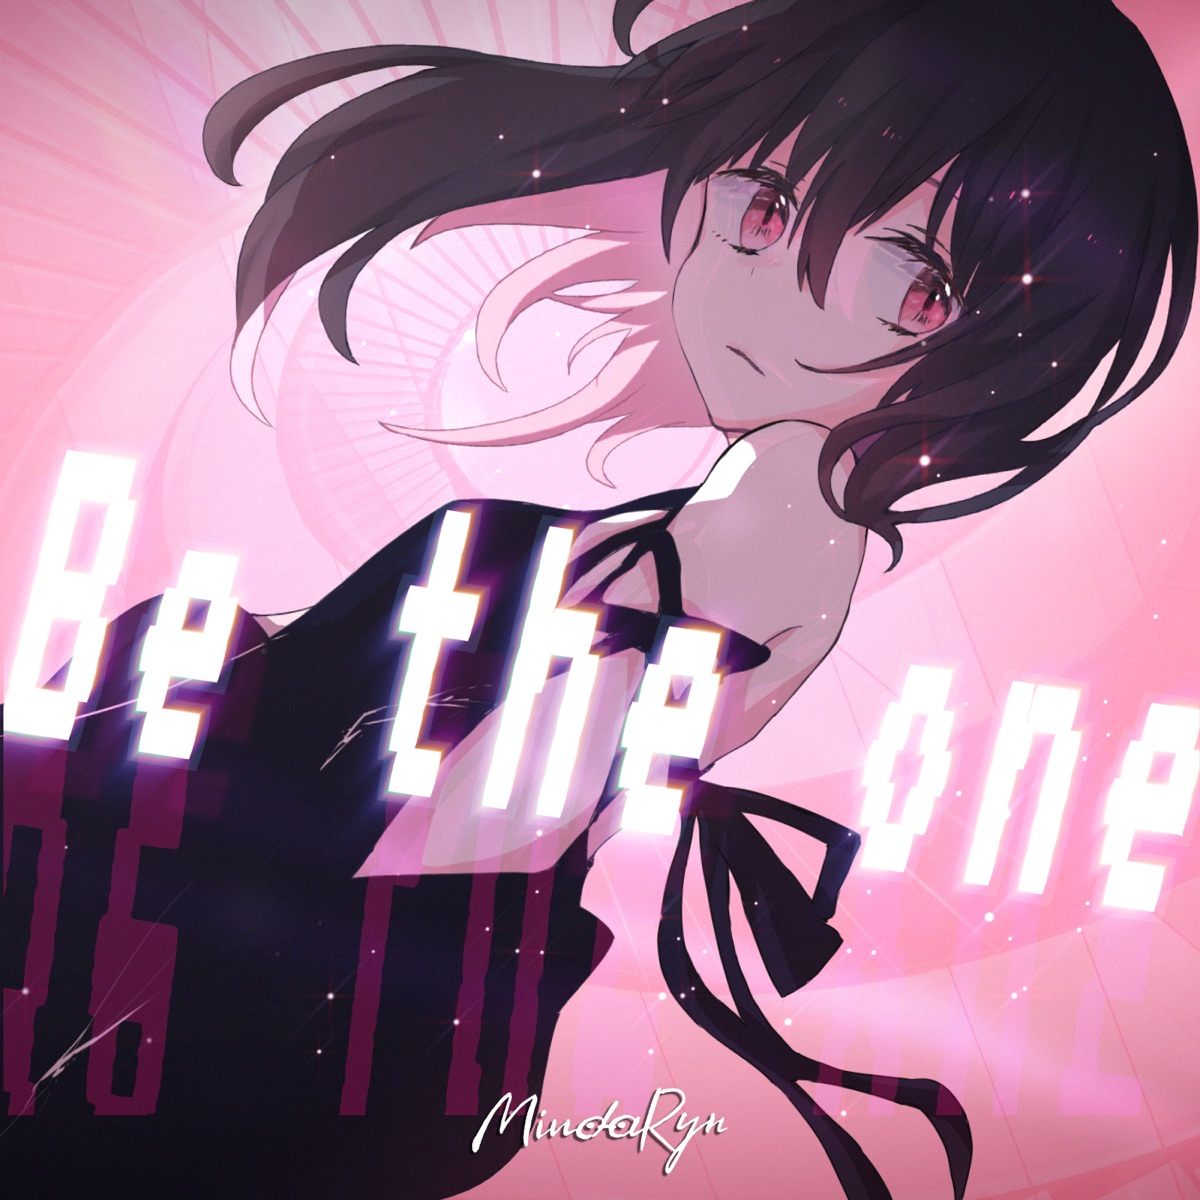 『MindaRyn - Be the one 歌詞』収録の『Be the one』ジャケット